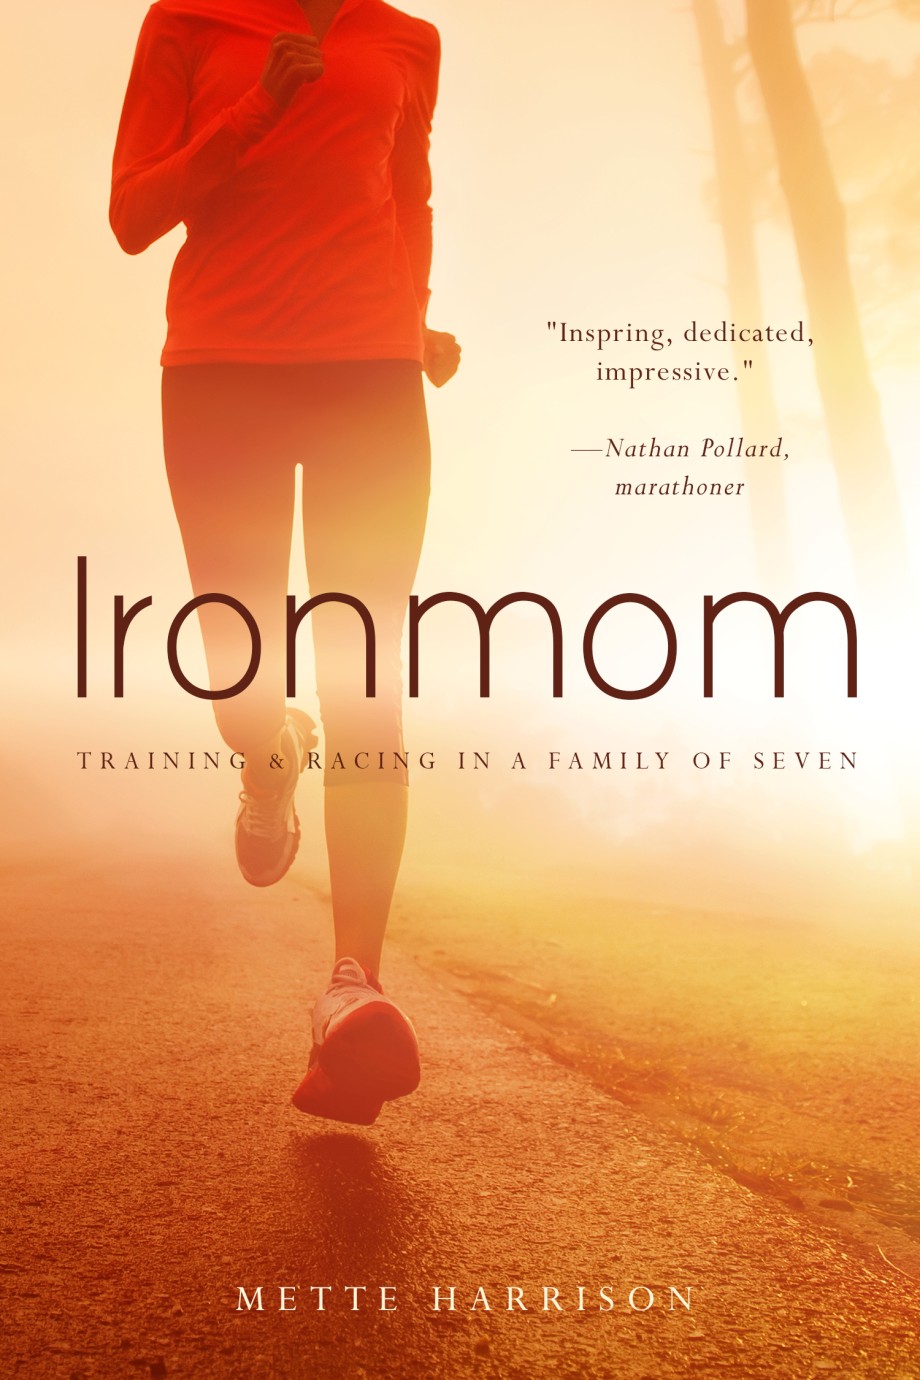 Ironmom Training and Racing with a Family of 7